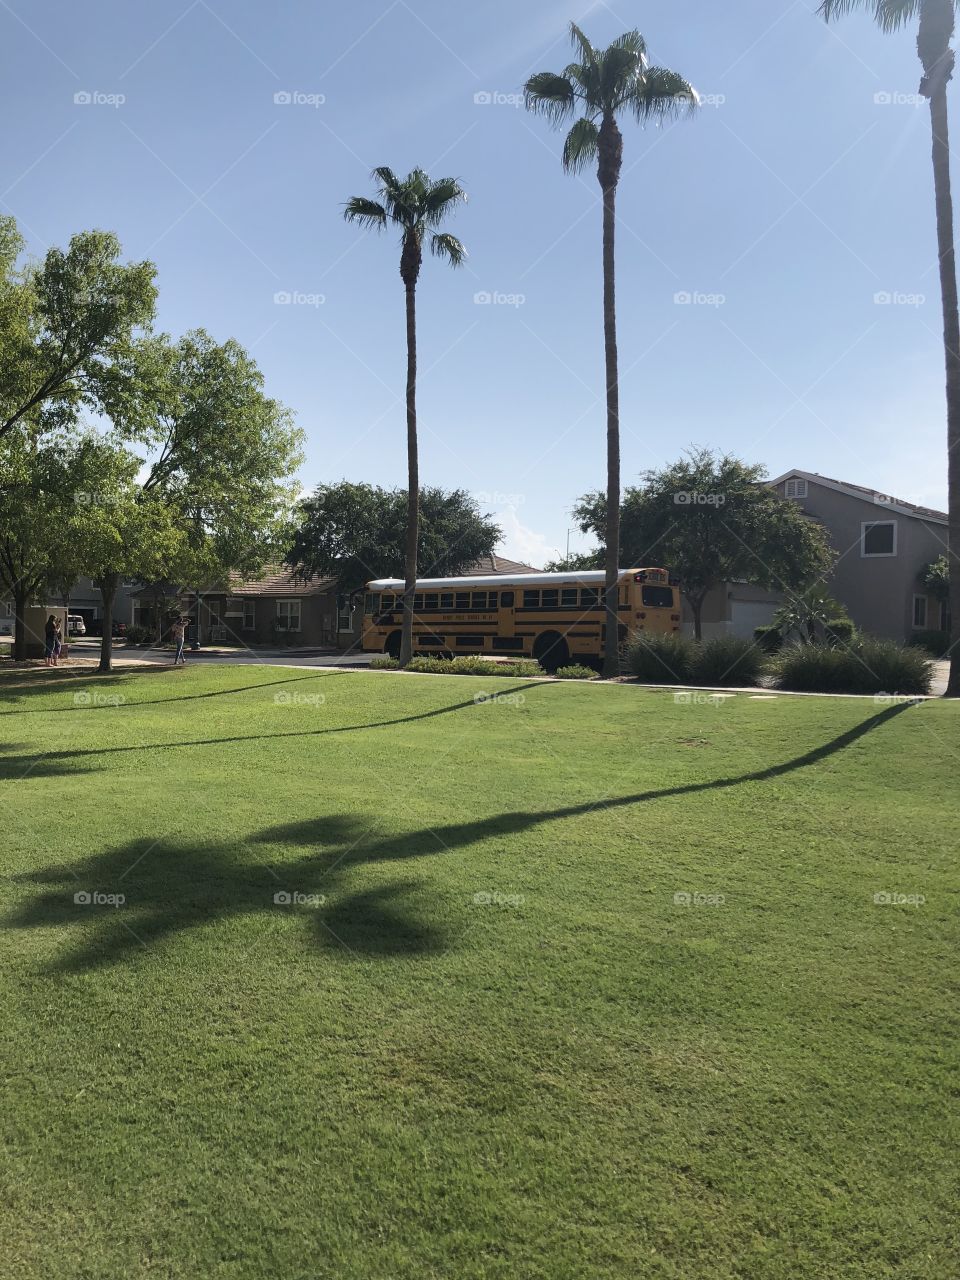 A school bus stopping at a neighborhood park